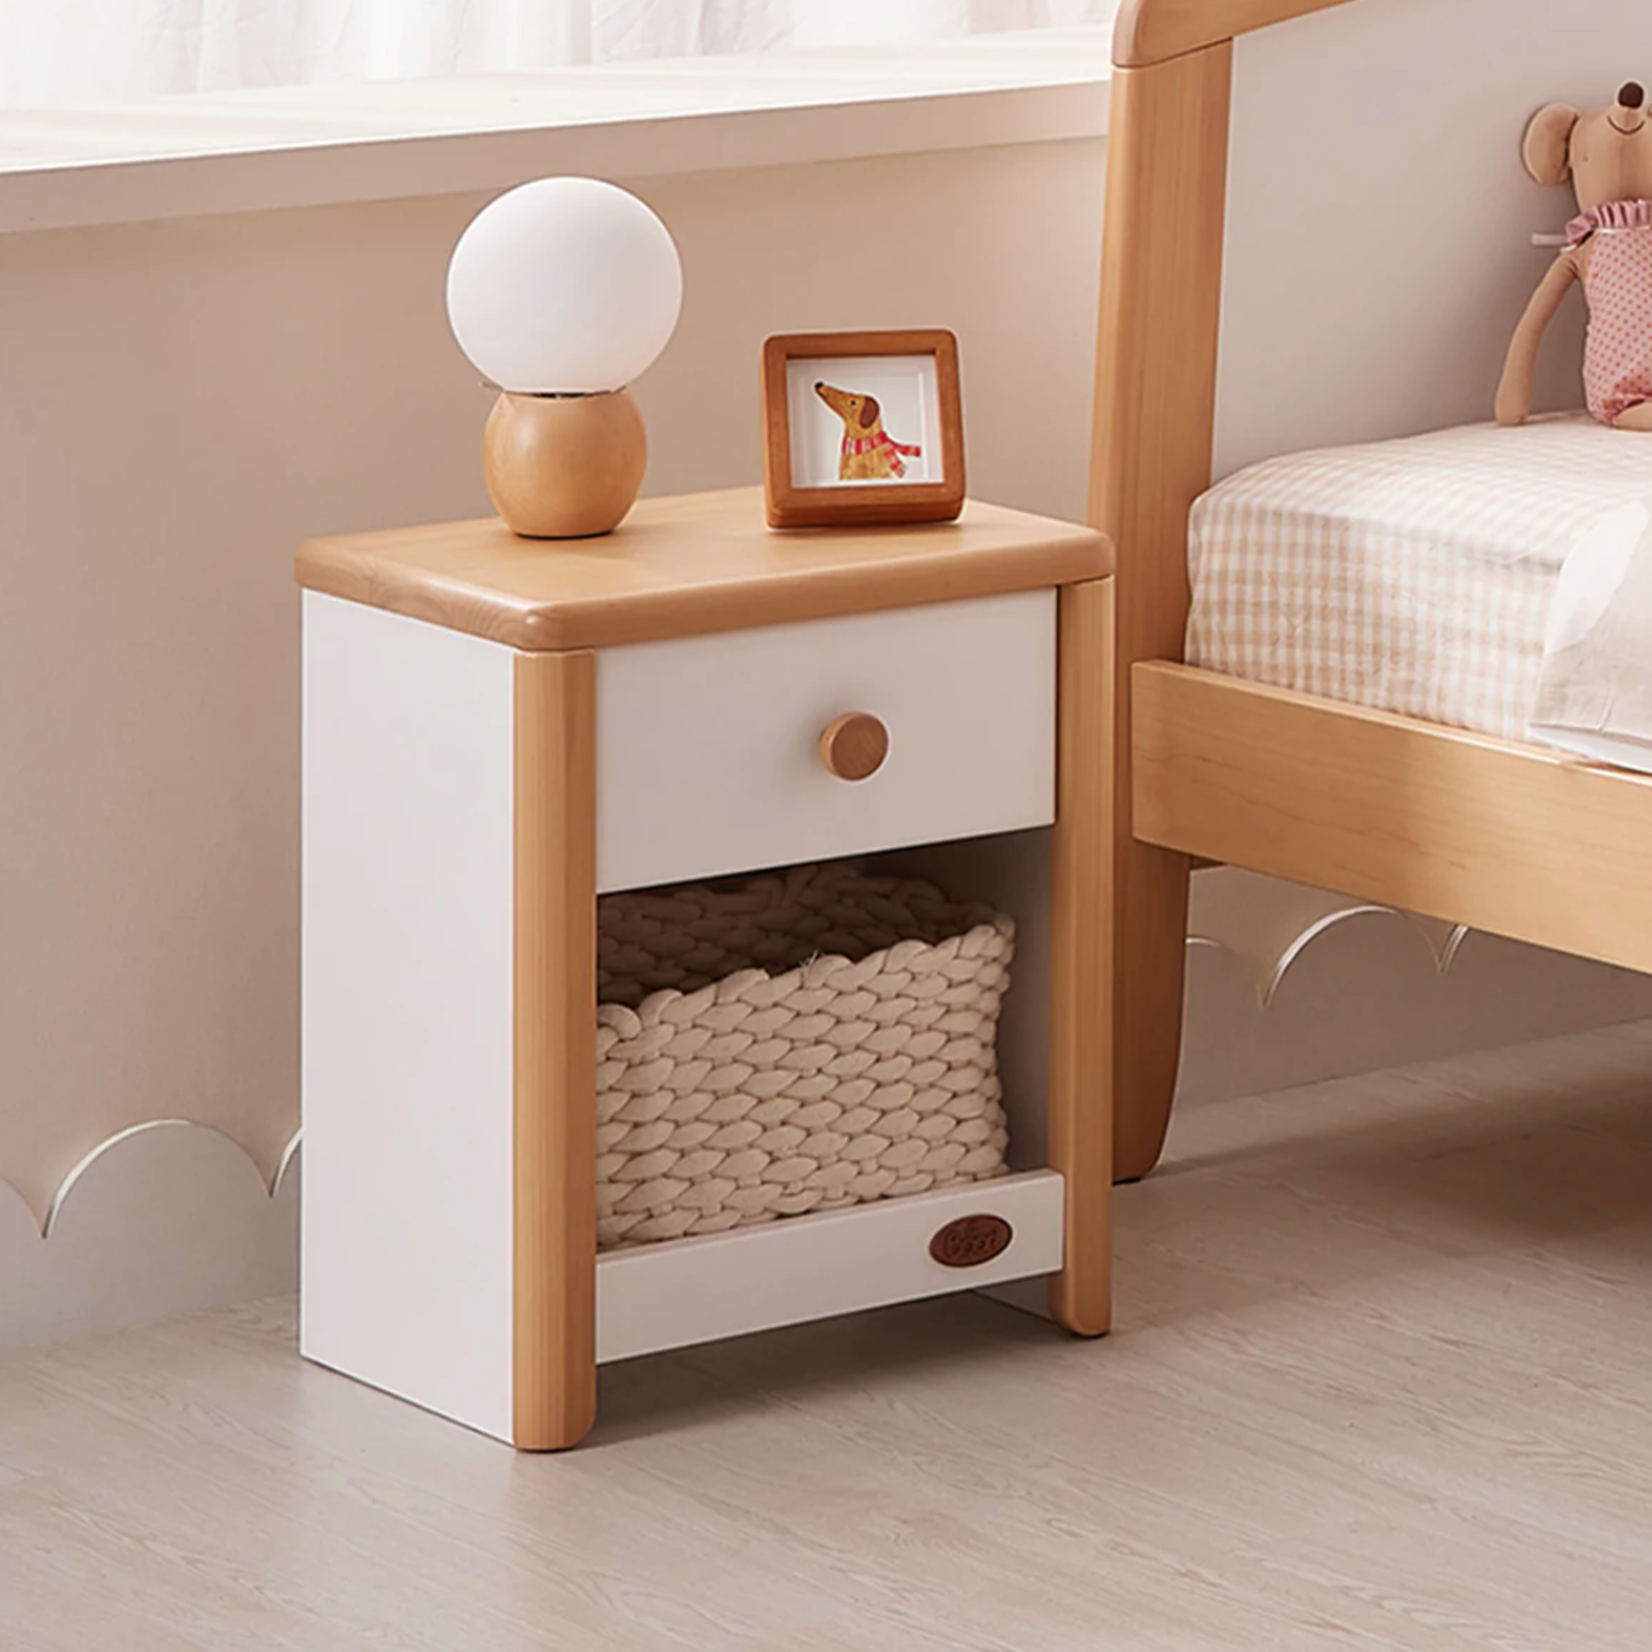 Boori Avalon Bedside Table-Cherry and Almond